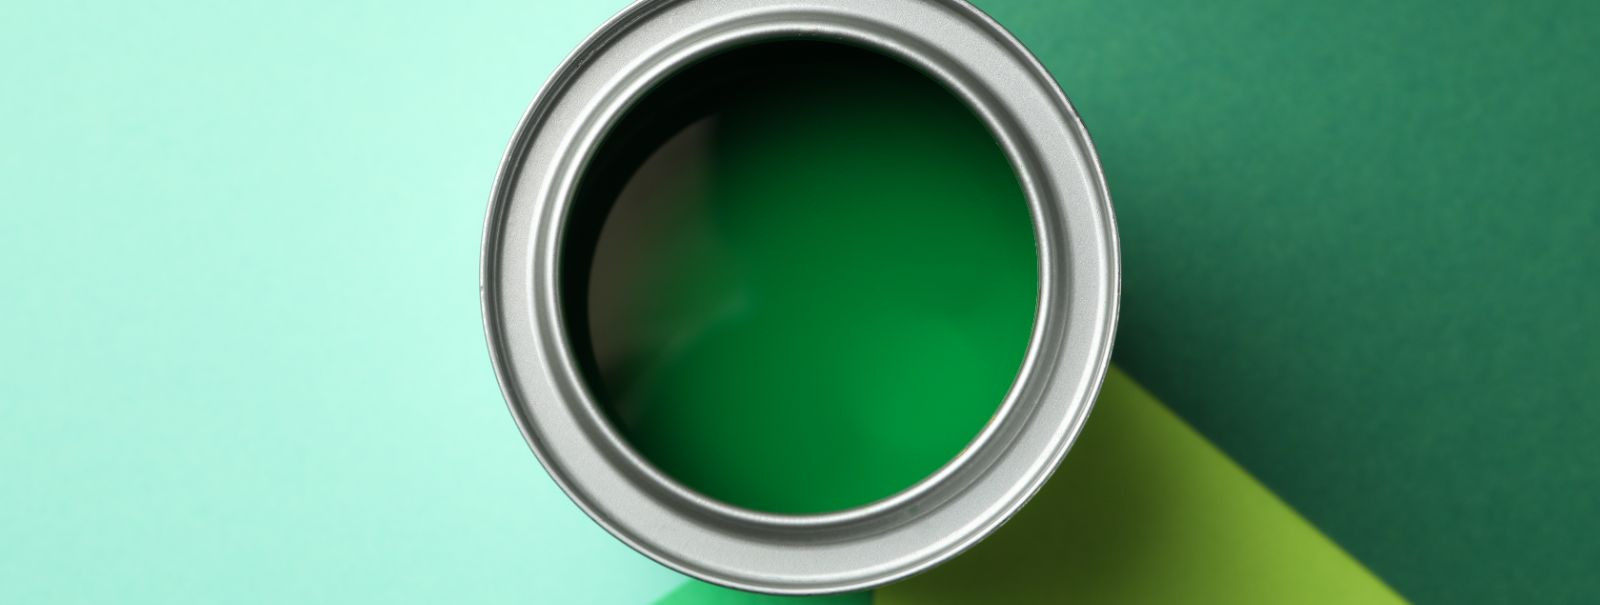 Eco-friendly paints, also known as green or sustainable paints, are coatings that have a reduced impact on the environment and human health. These paints are fo